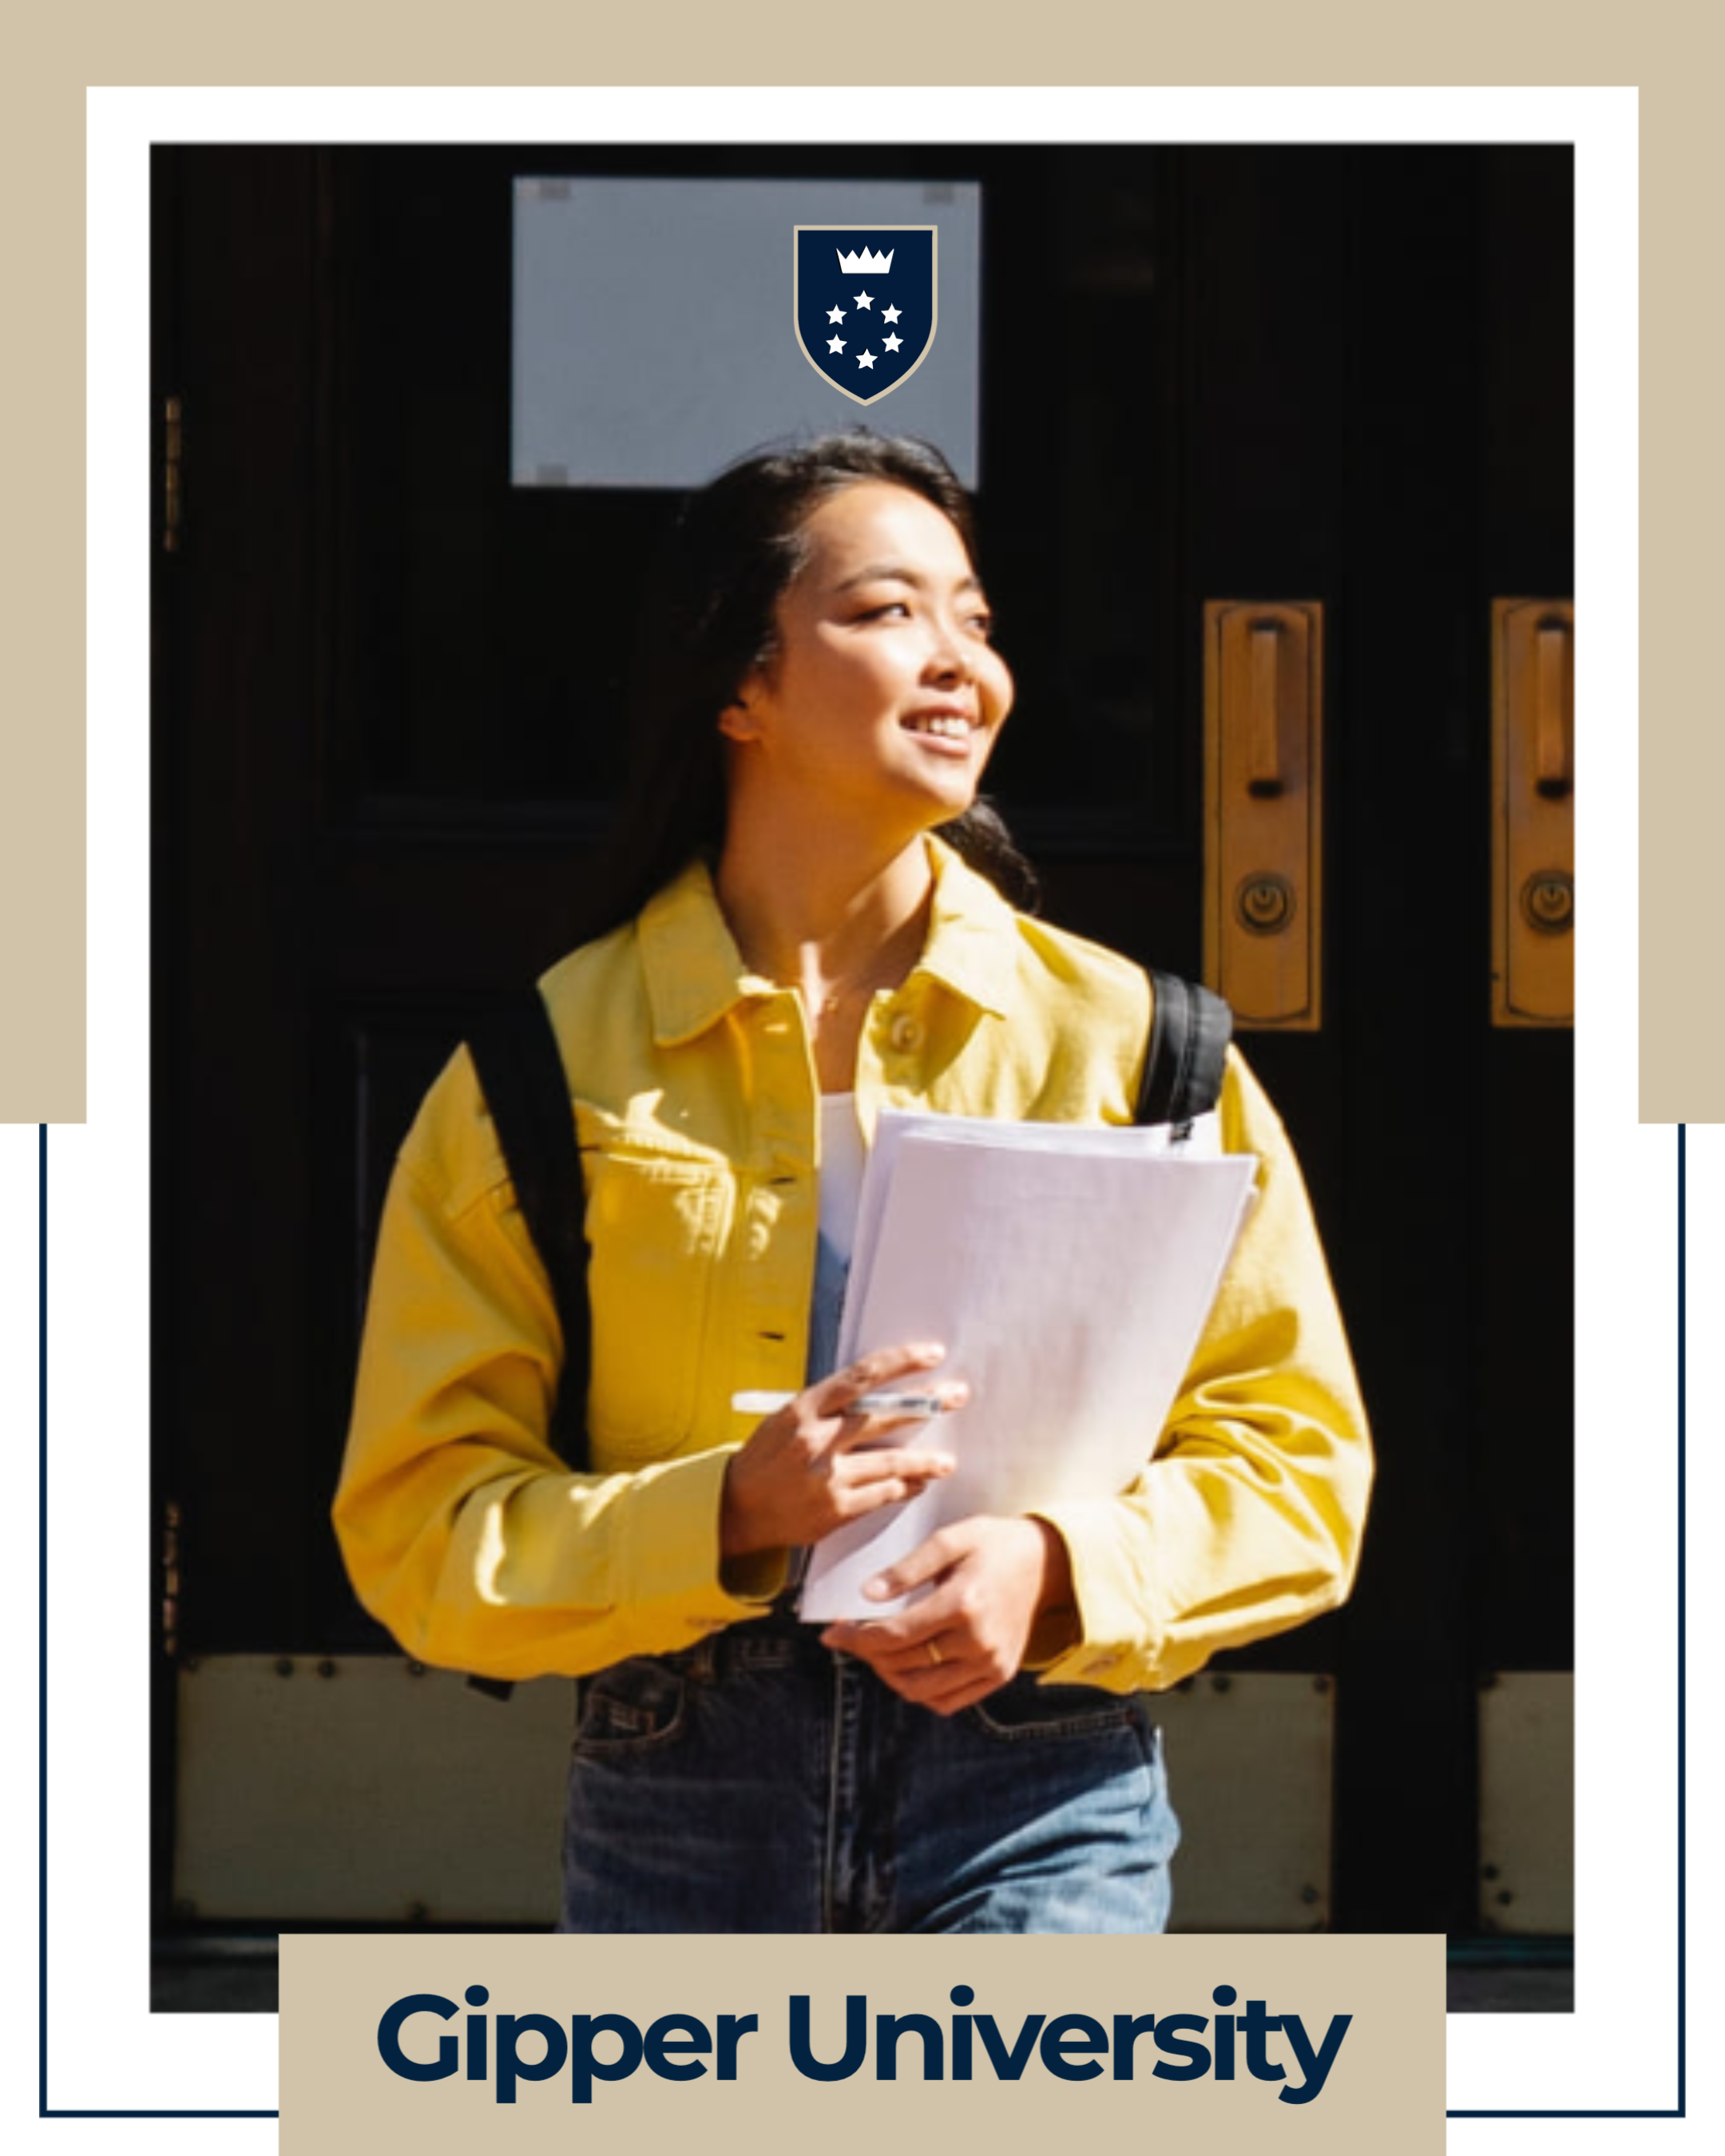 Gipper branded frame template showcasing a photo of a young female student wearing a yellow jacket and wearing a backpack walking with papers inside a white, tan, and navy picture frame